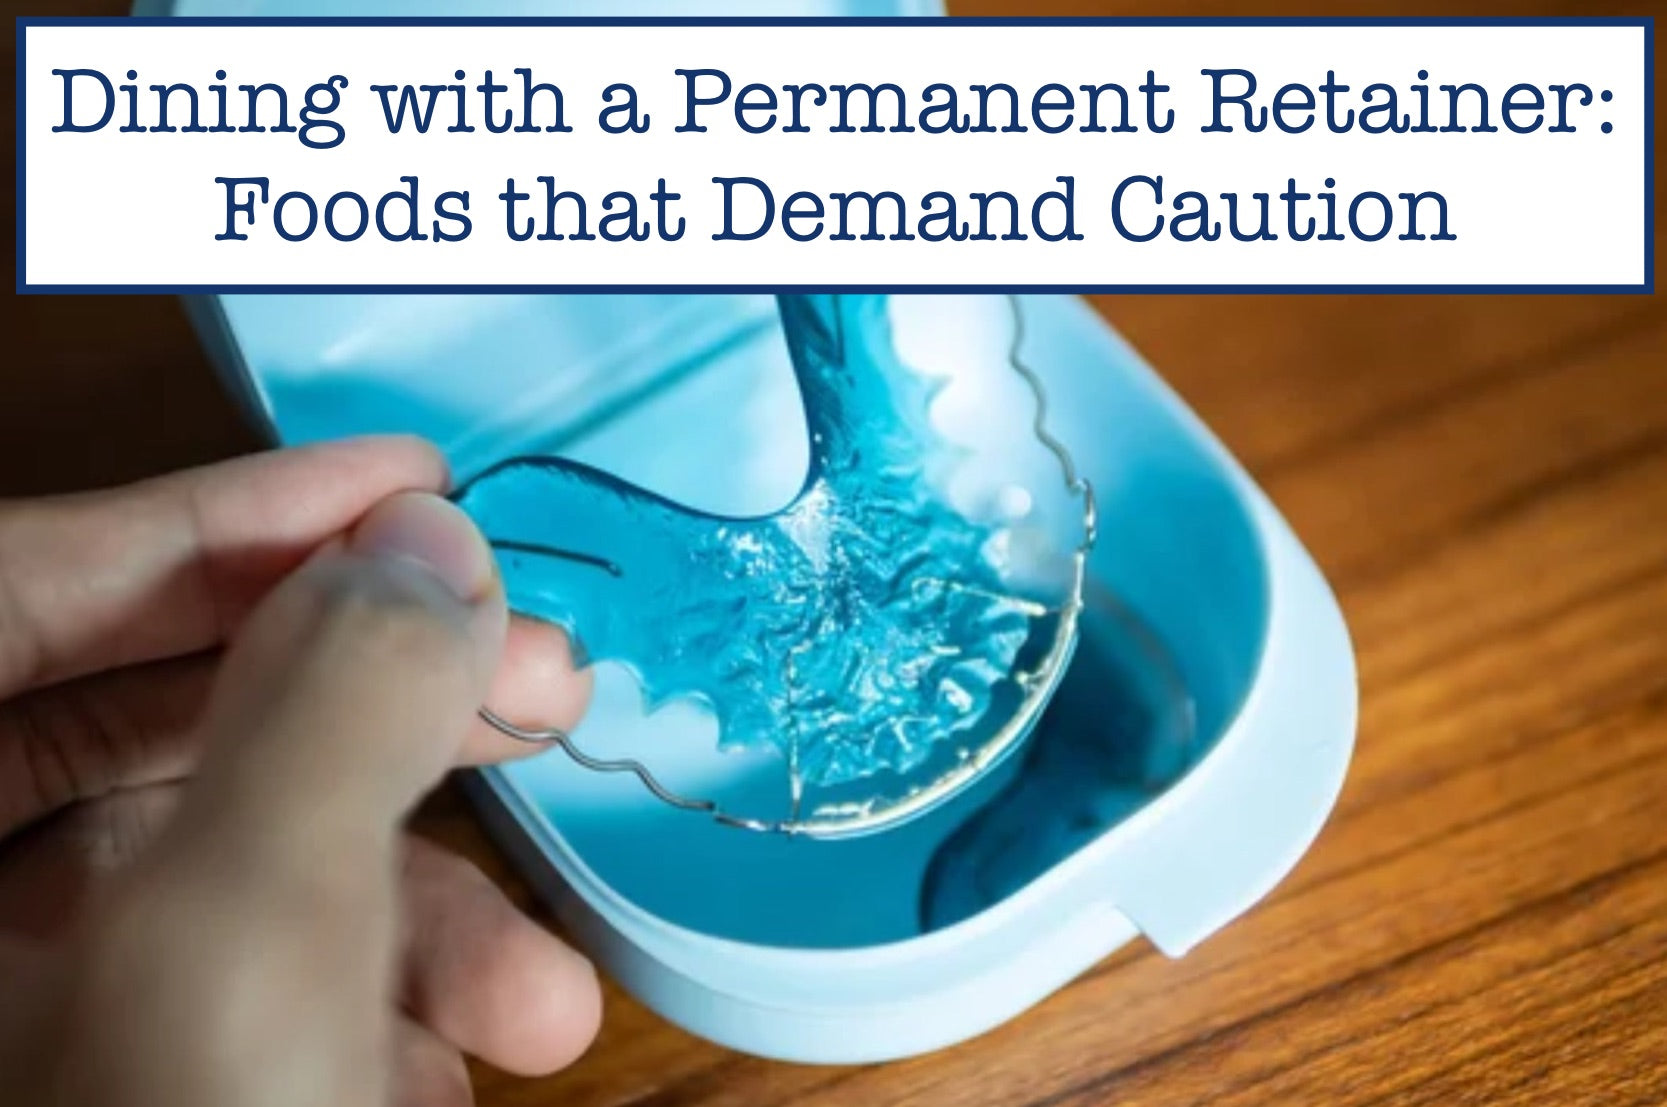 Permanent Retainer Problems: 15 Foods to Keep Off Your Plate